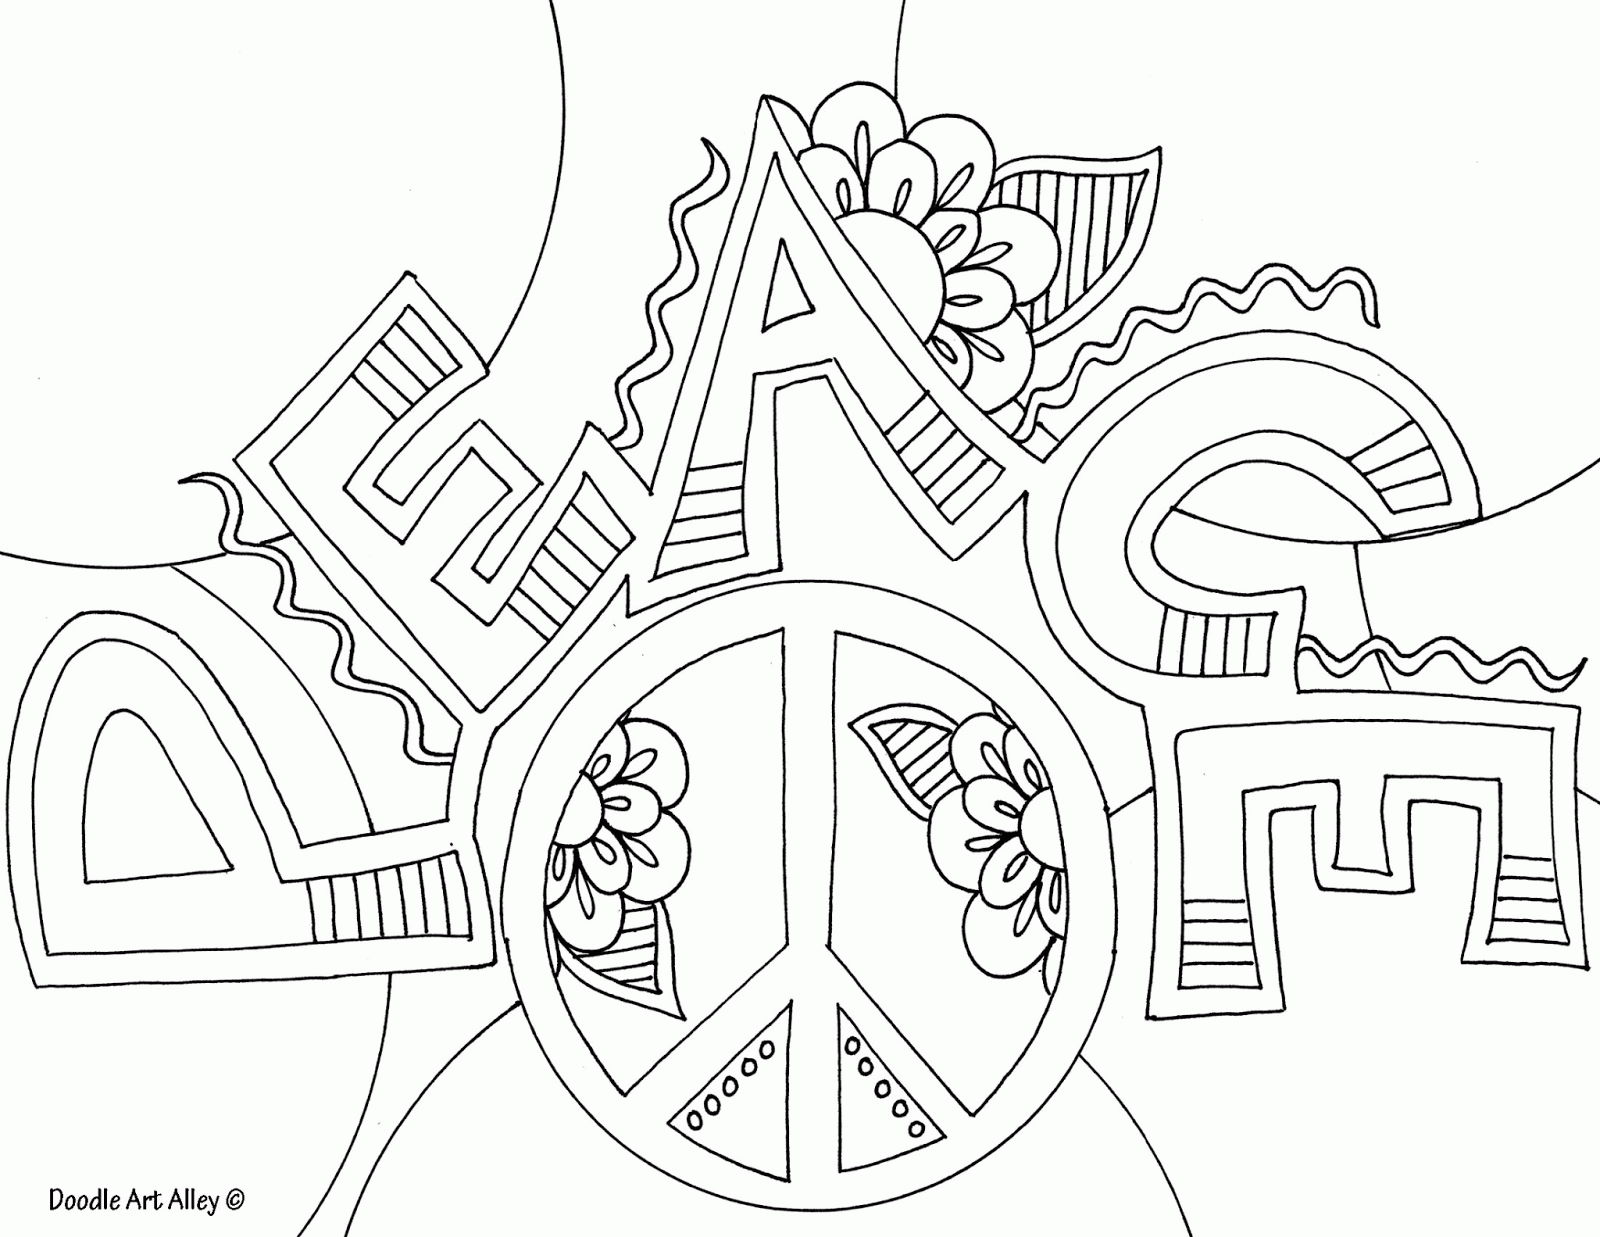 Download Doodle Art Alley All Quotes Coloring Pages - Coloring Home